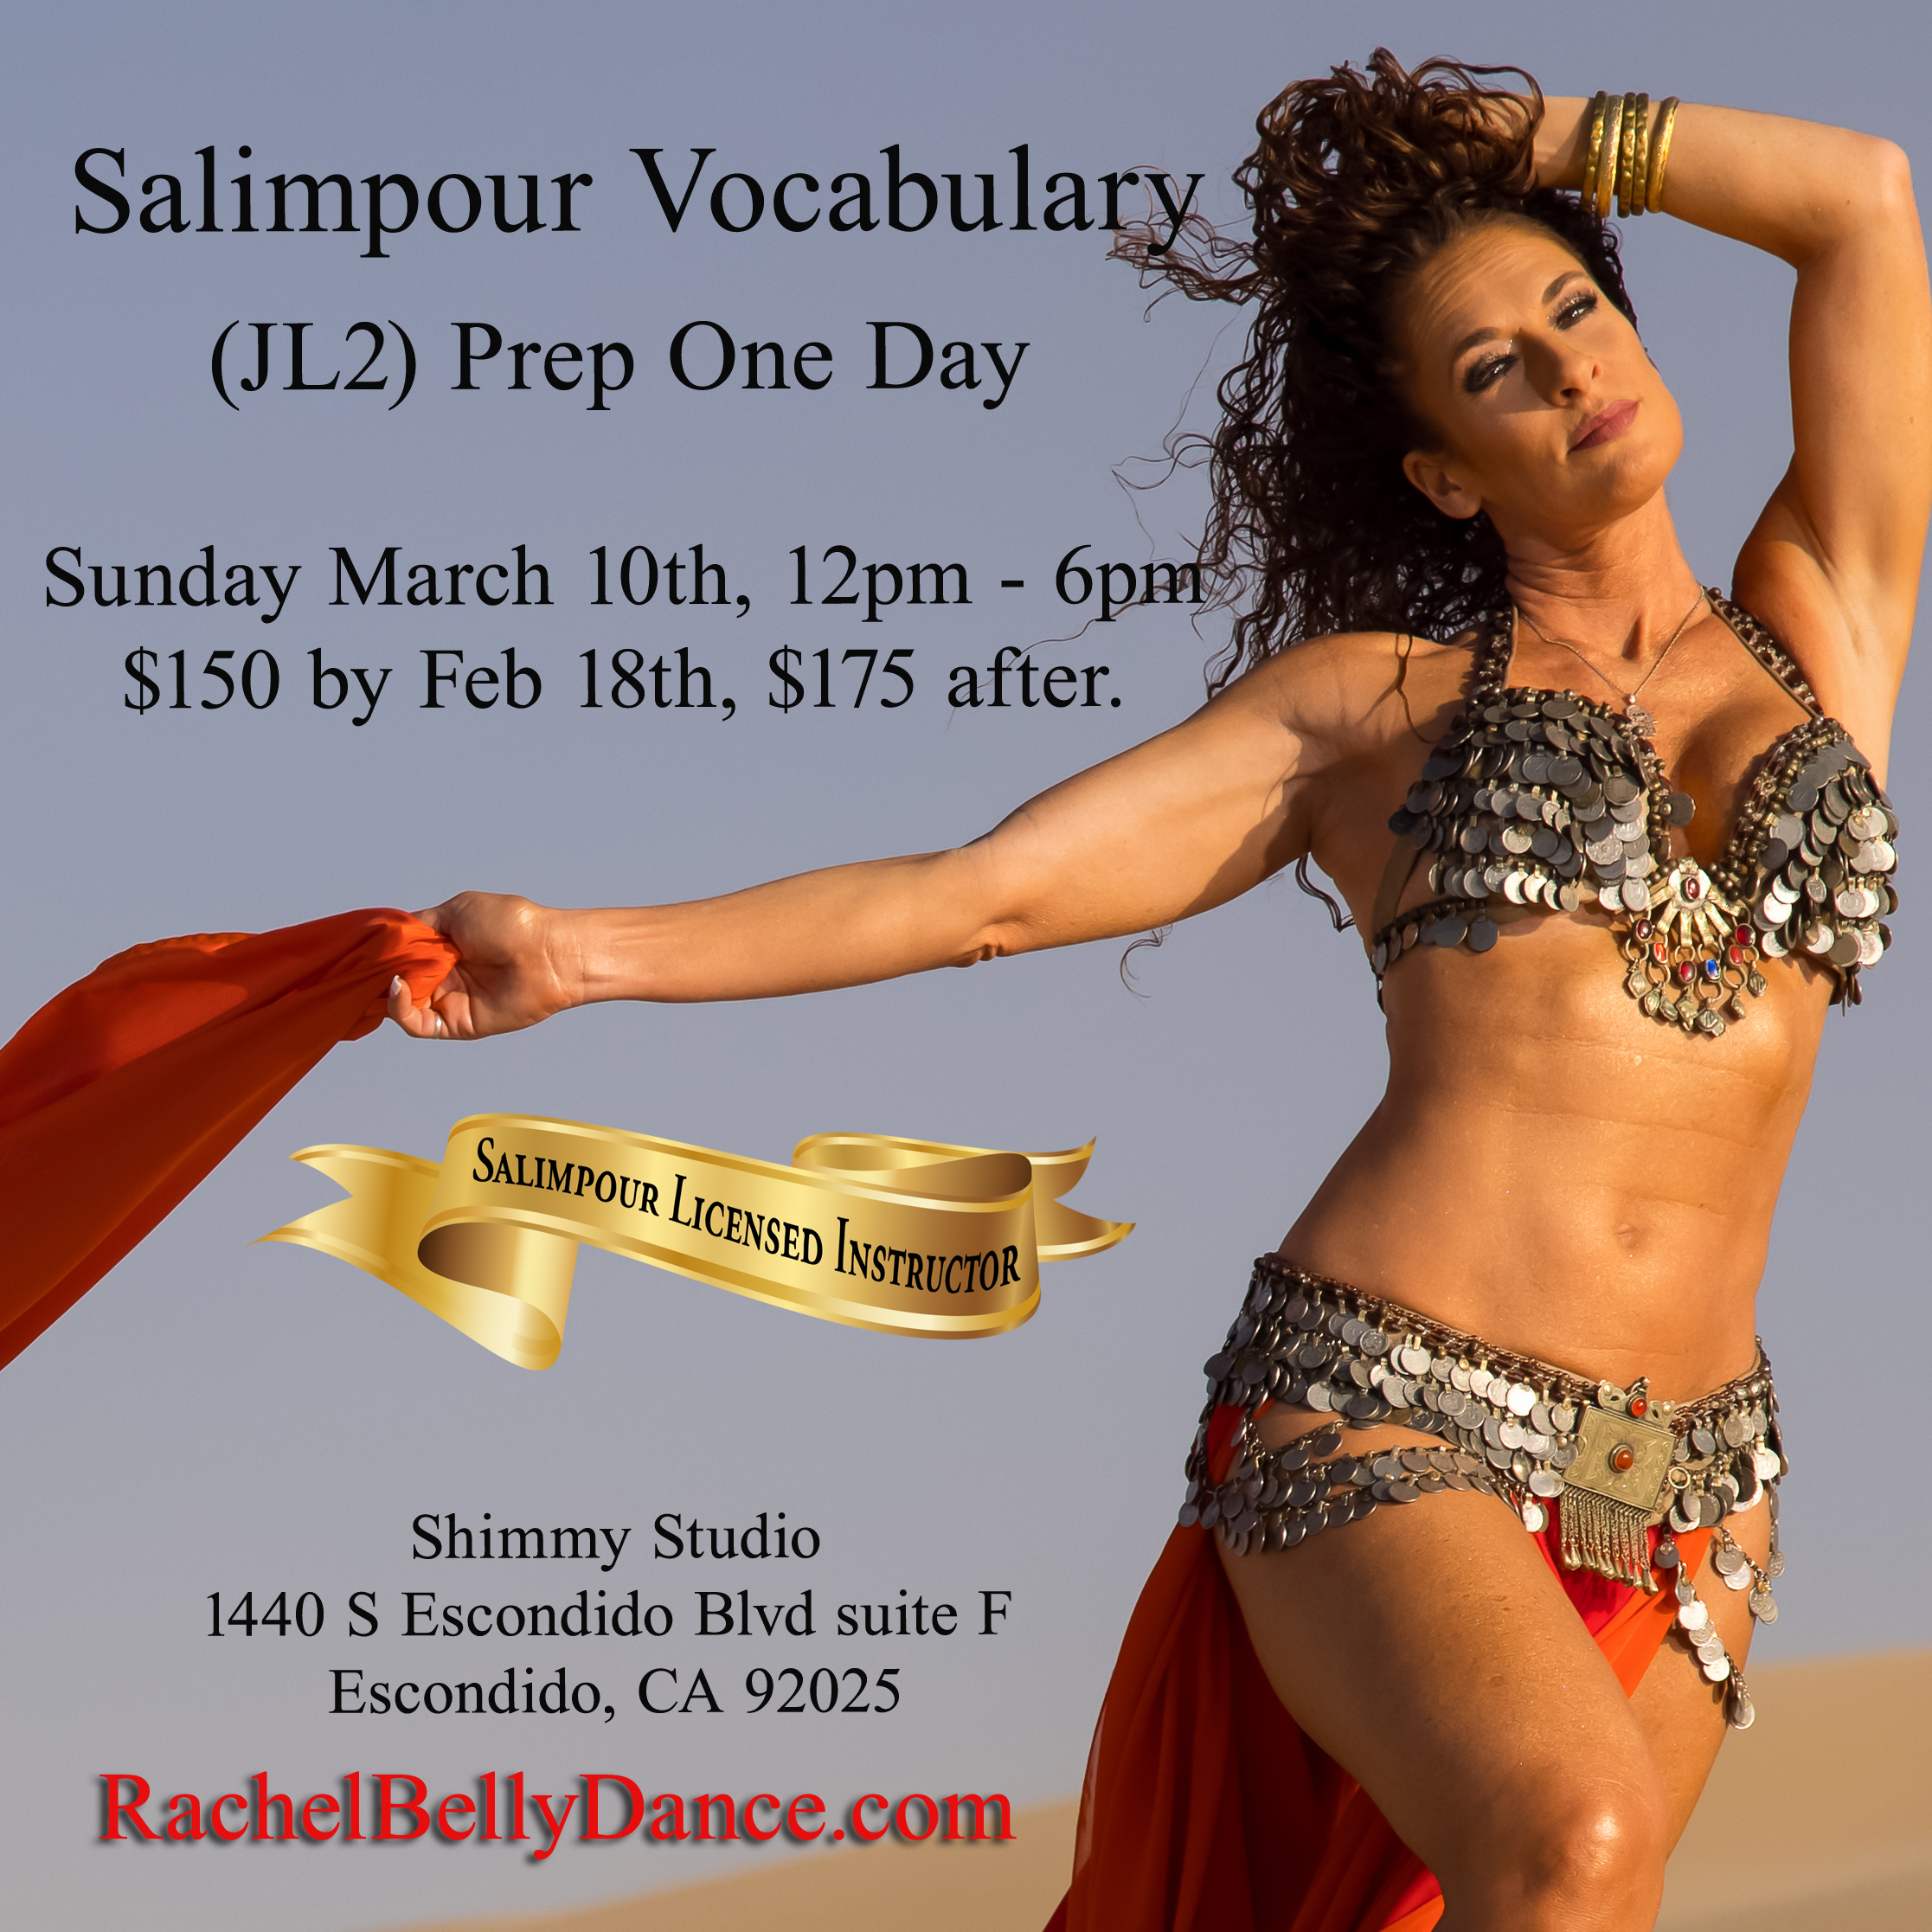 Salimpour Vocabulary (JL2) Prep One Day Workshop’s